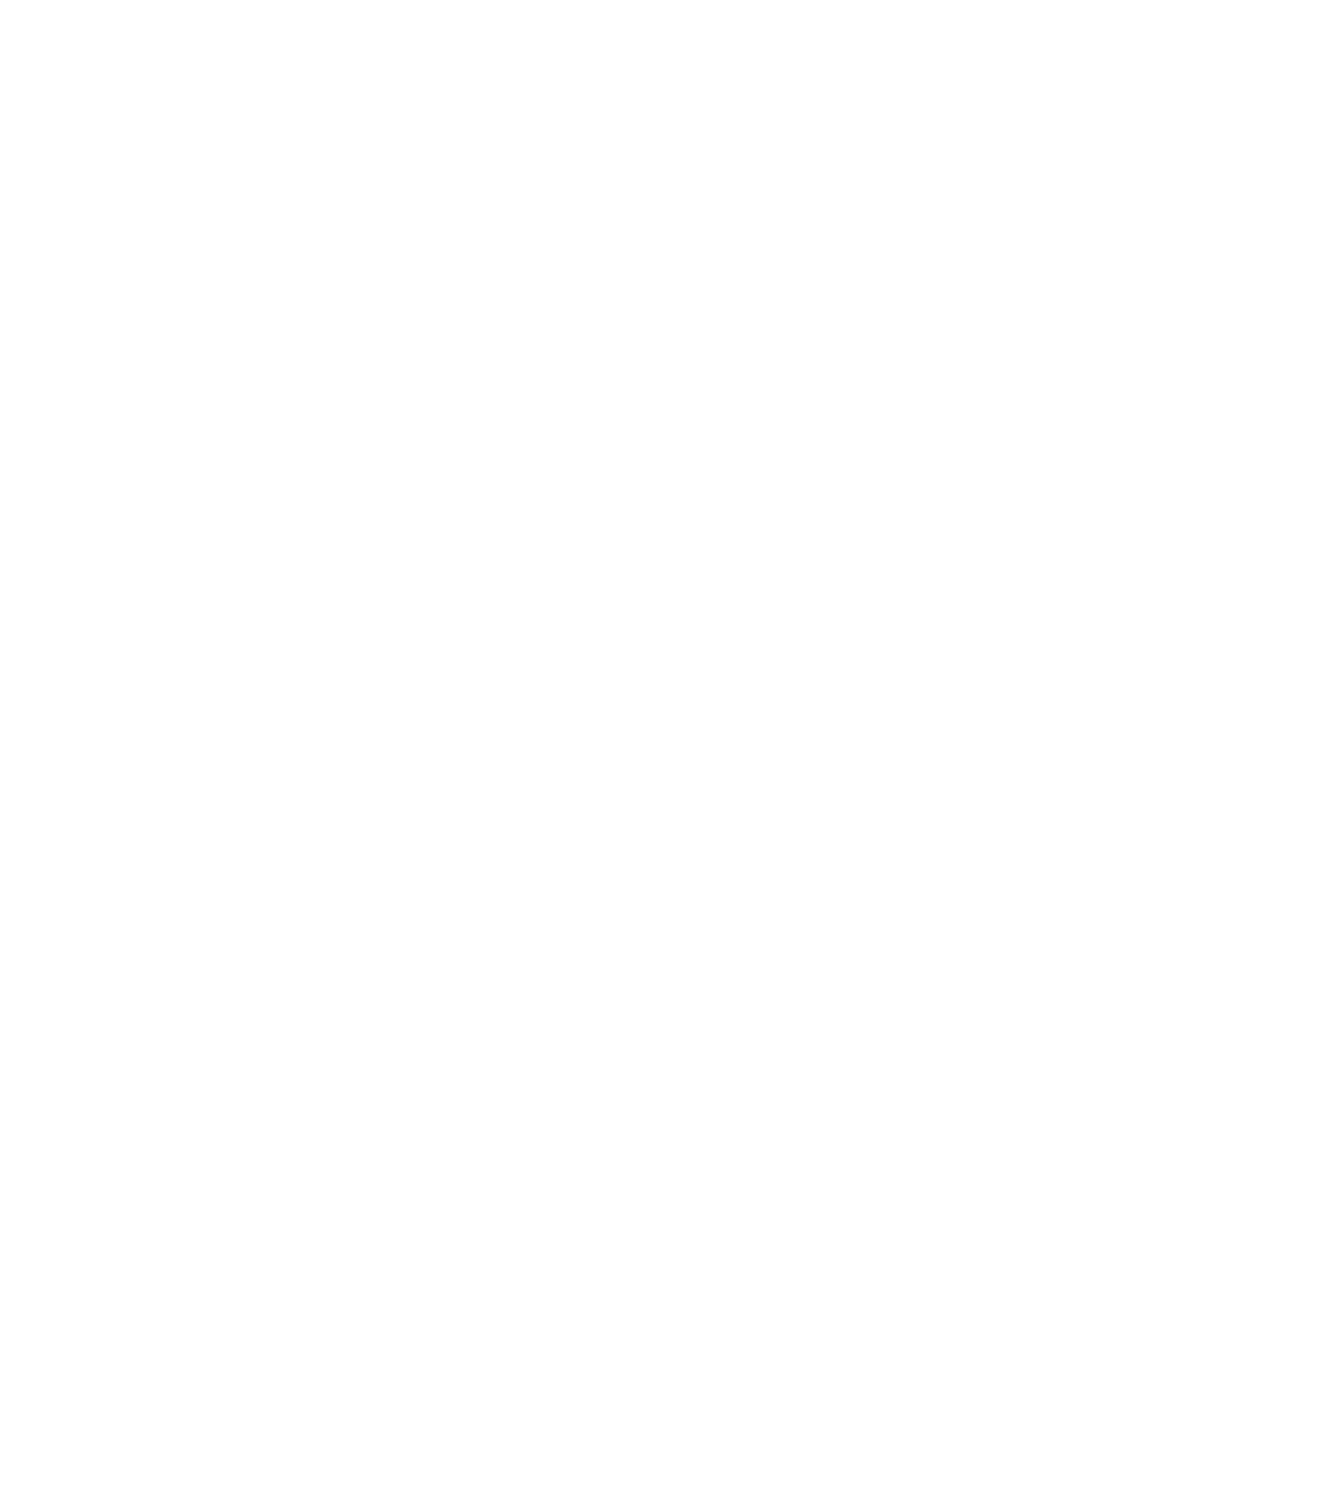 70 West Counseling